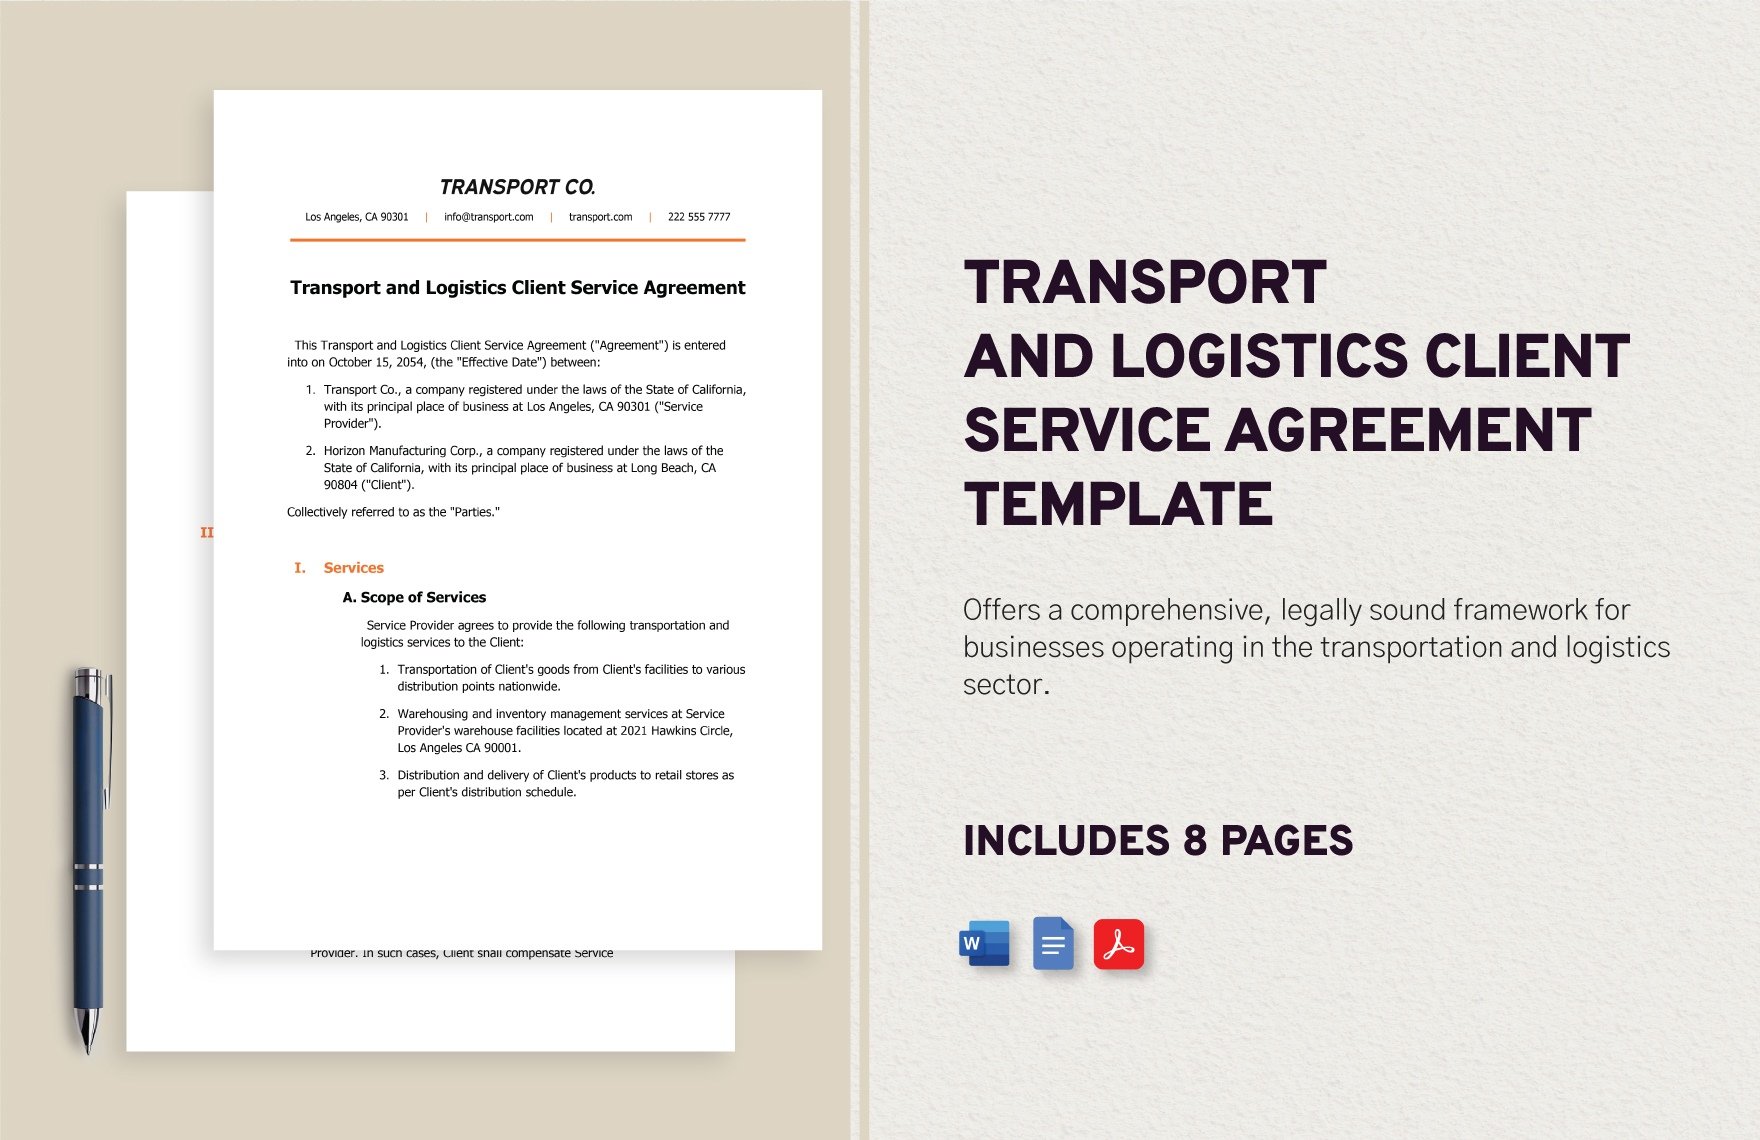 Transport and Logistics Client Service Agreement Template